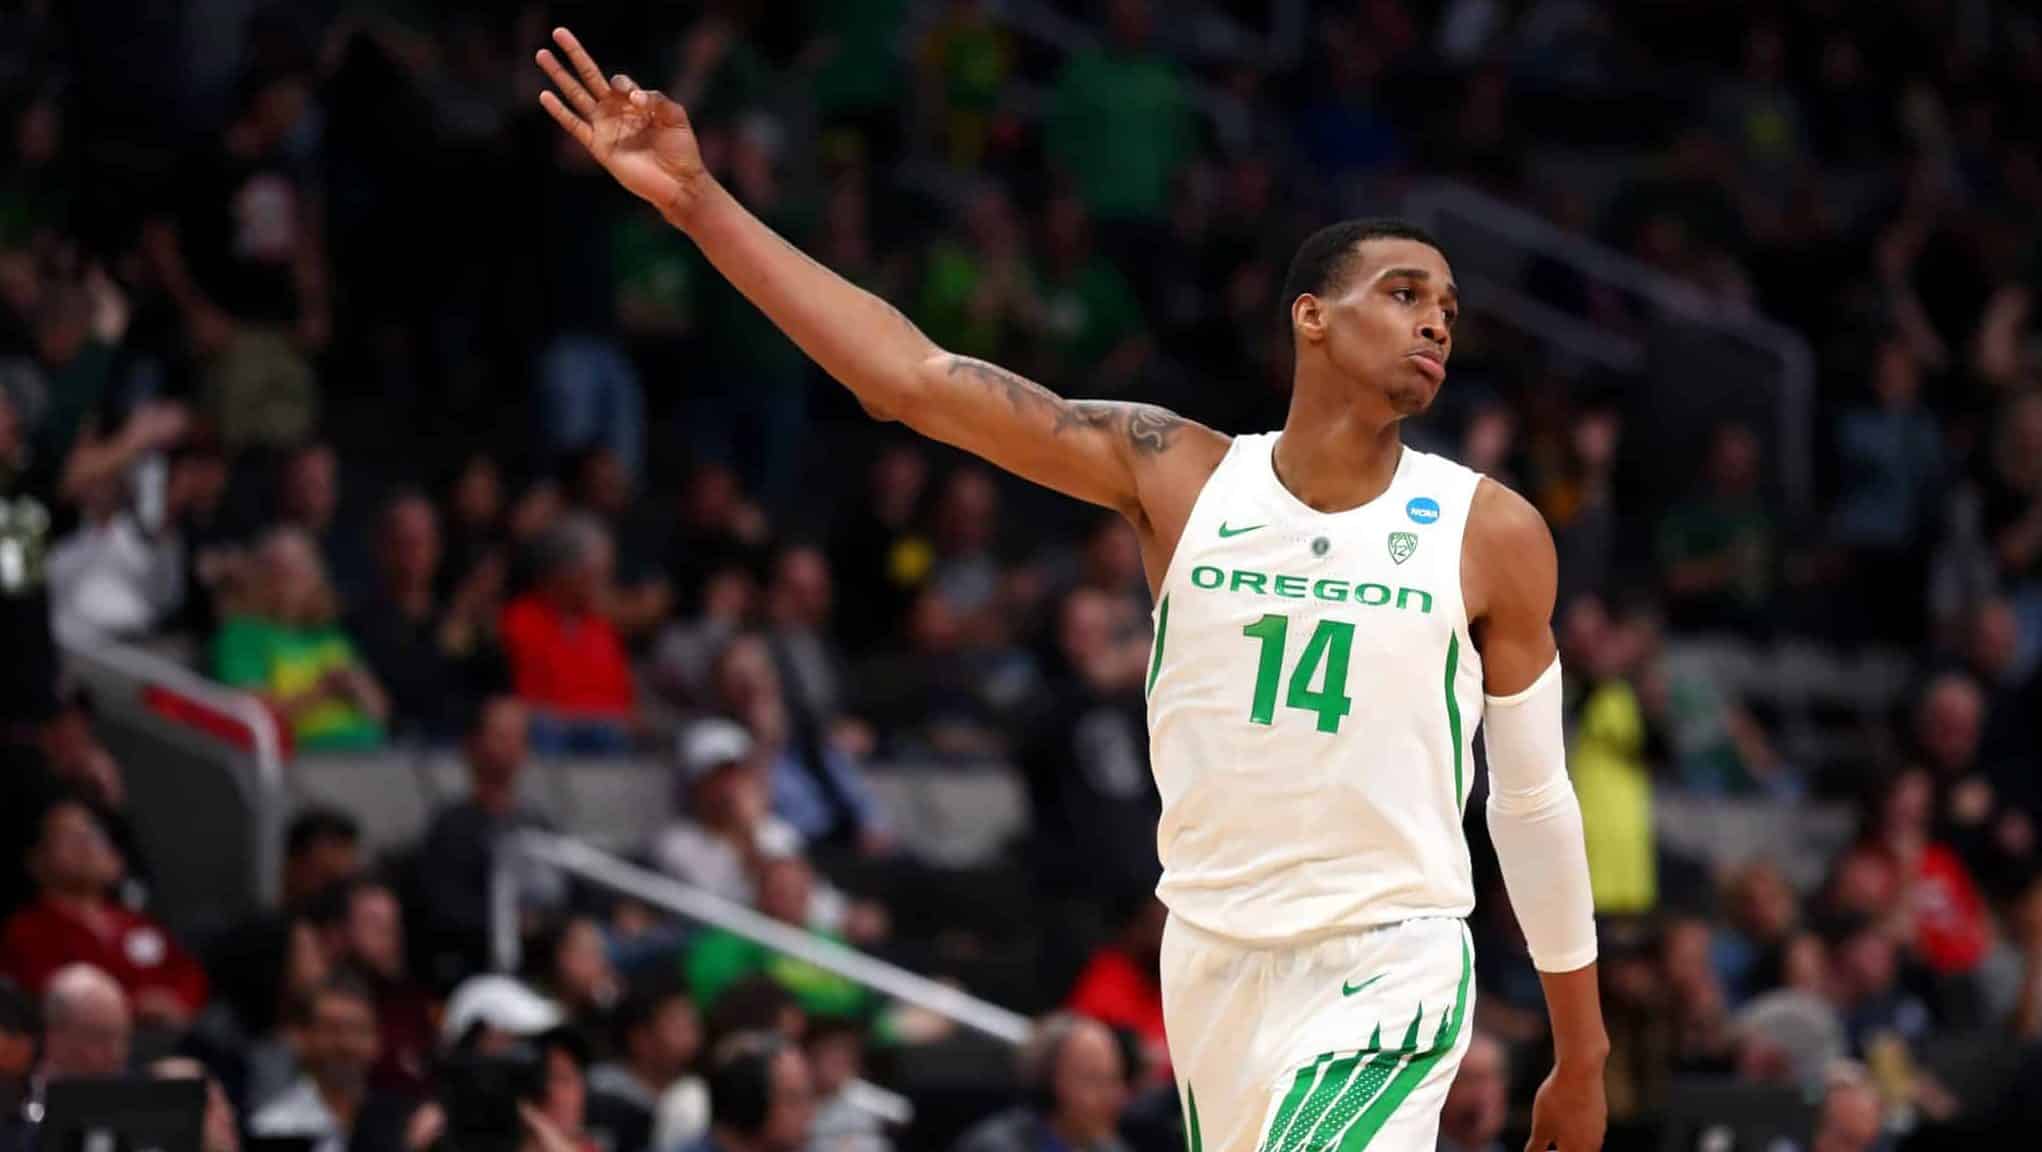 SAN JOSE, CALIFORNIA - MARCH 24: Kenny Wooten #14 of the Oregon Ducks celebrates after a play in the second half against the UC Irvine Anteaters during the second round of the 2019 NCAA Men's Basketball Tournament at SAP Center on March 24, 2019 in San Jose, California.